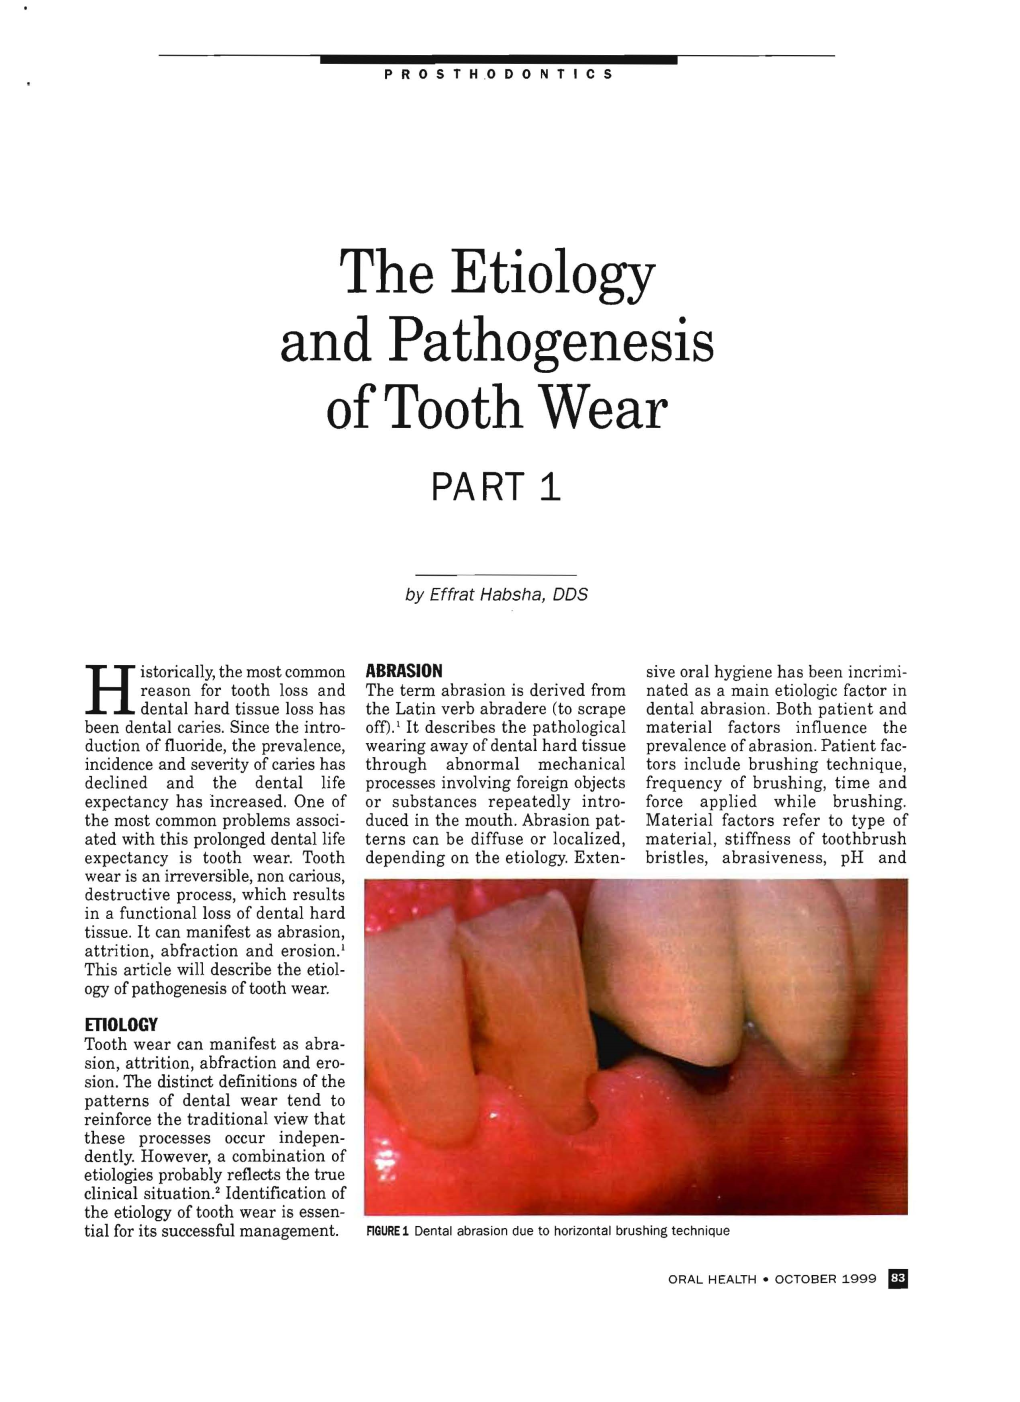 The Etiology and Pathogenesis of Tooth Wear. Oral Health, 1999